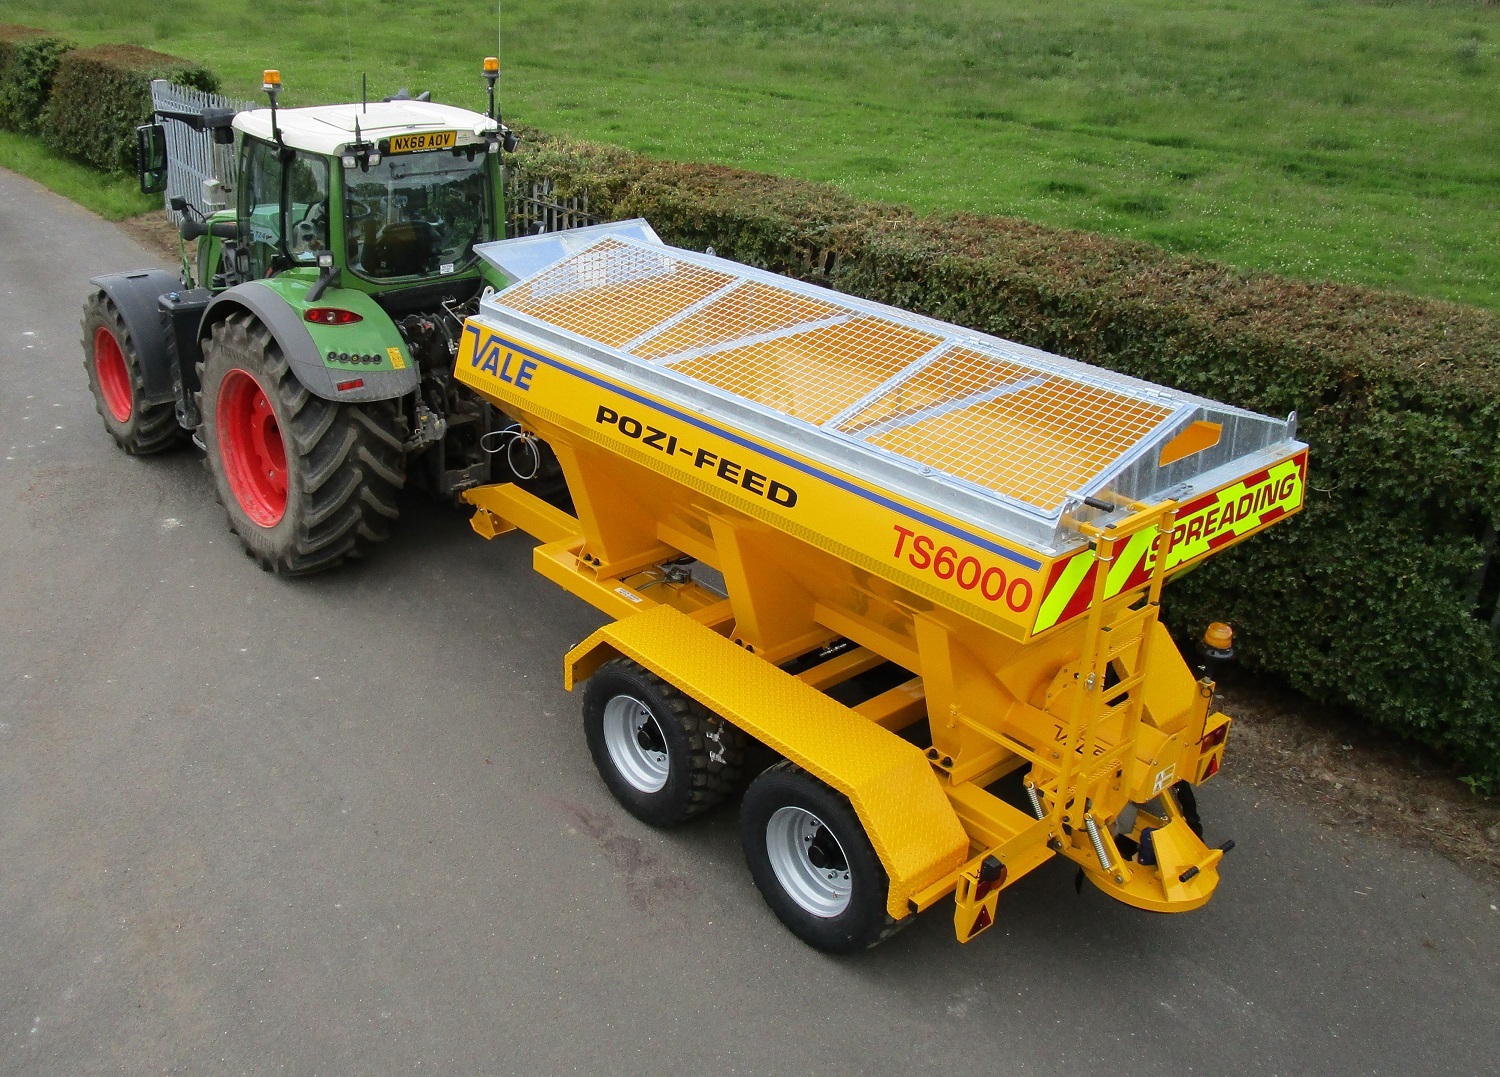 Tractor Towed Salt Spreader (Gritter) VALE TS6000 - Galvanized pitched mesh, complete with access hatch